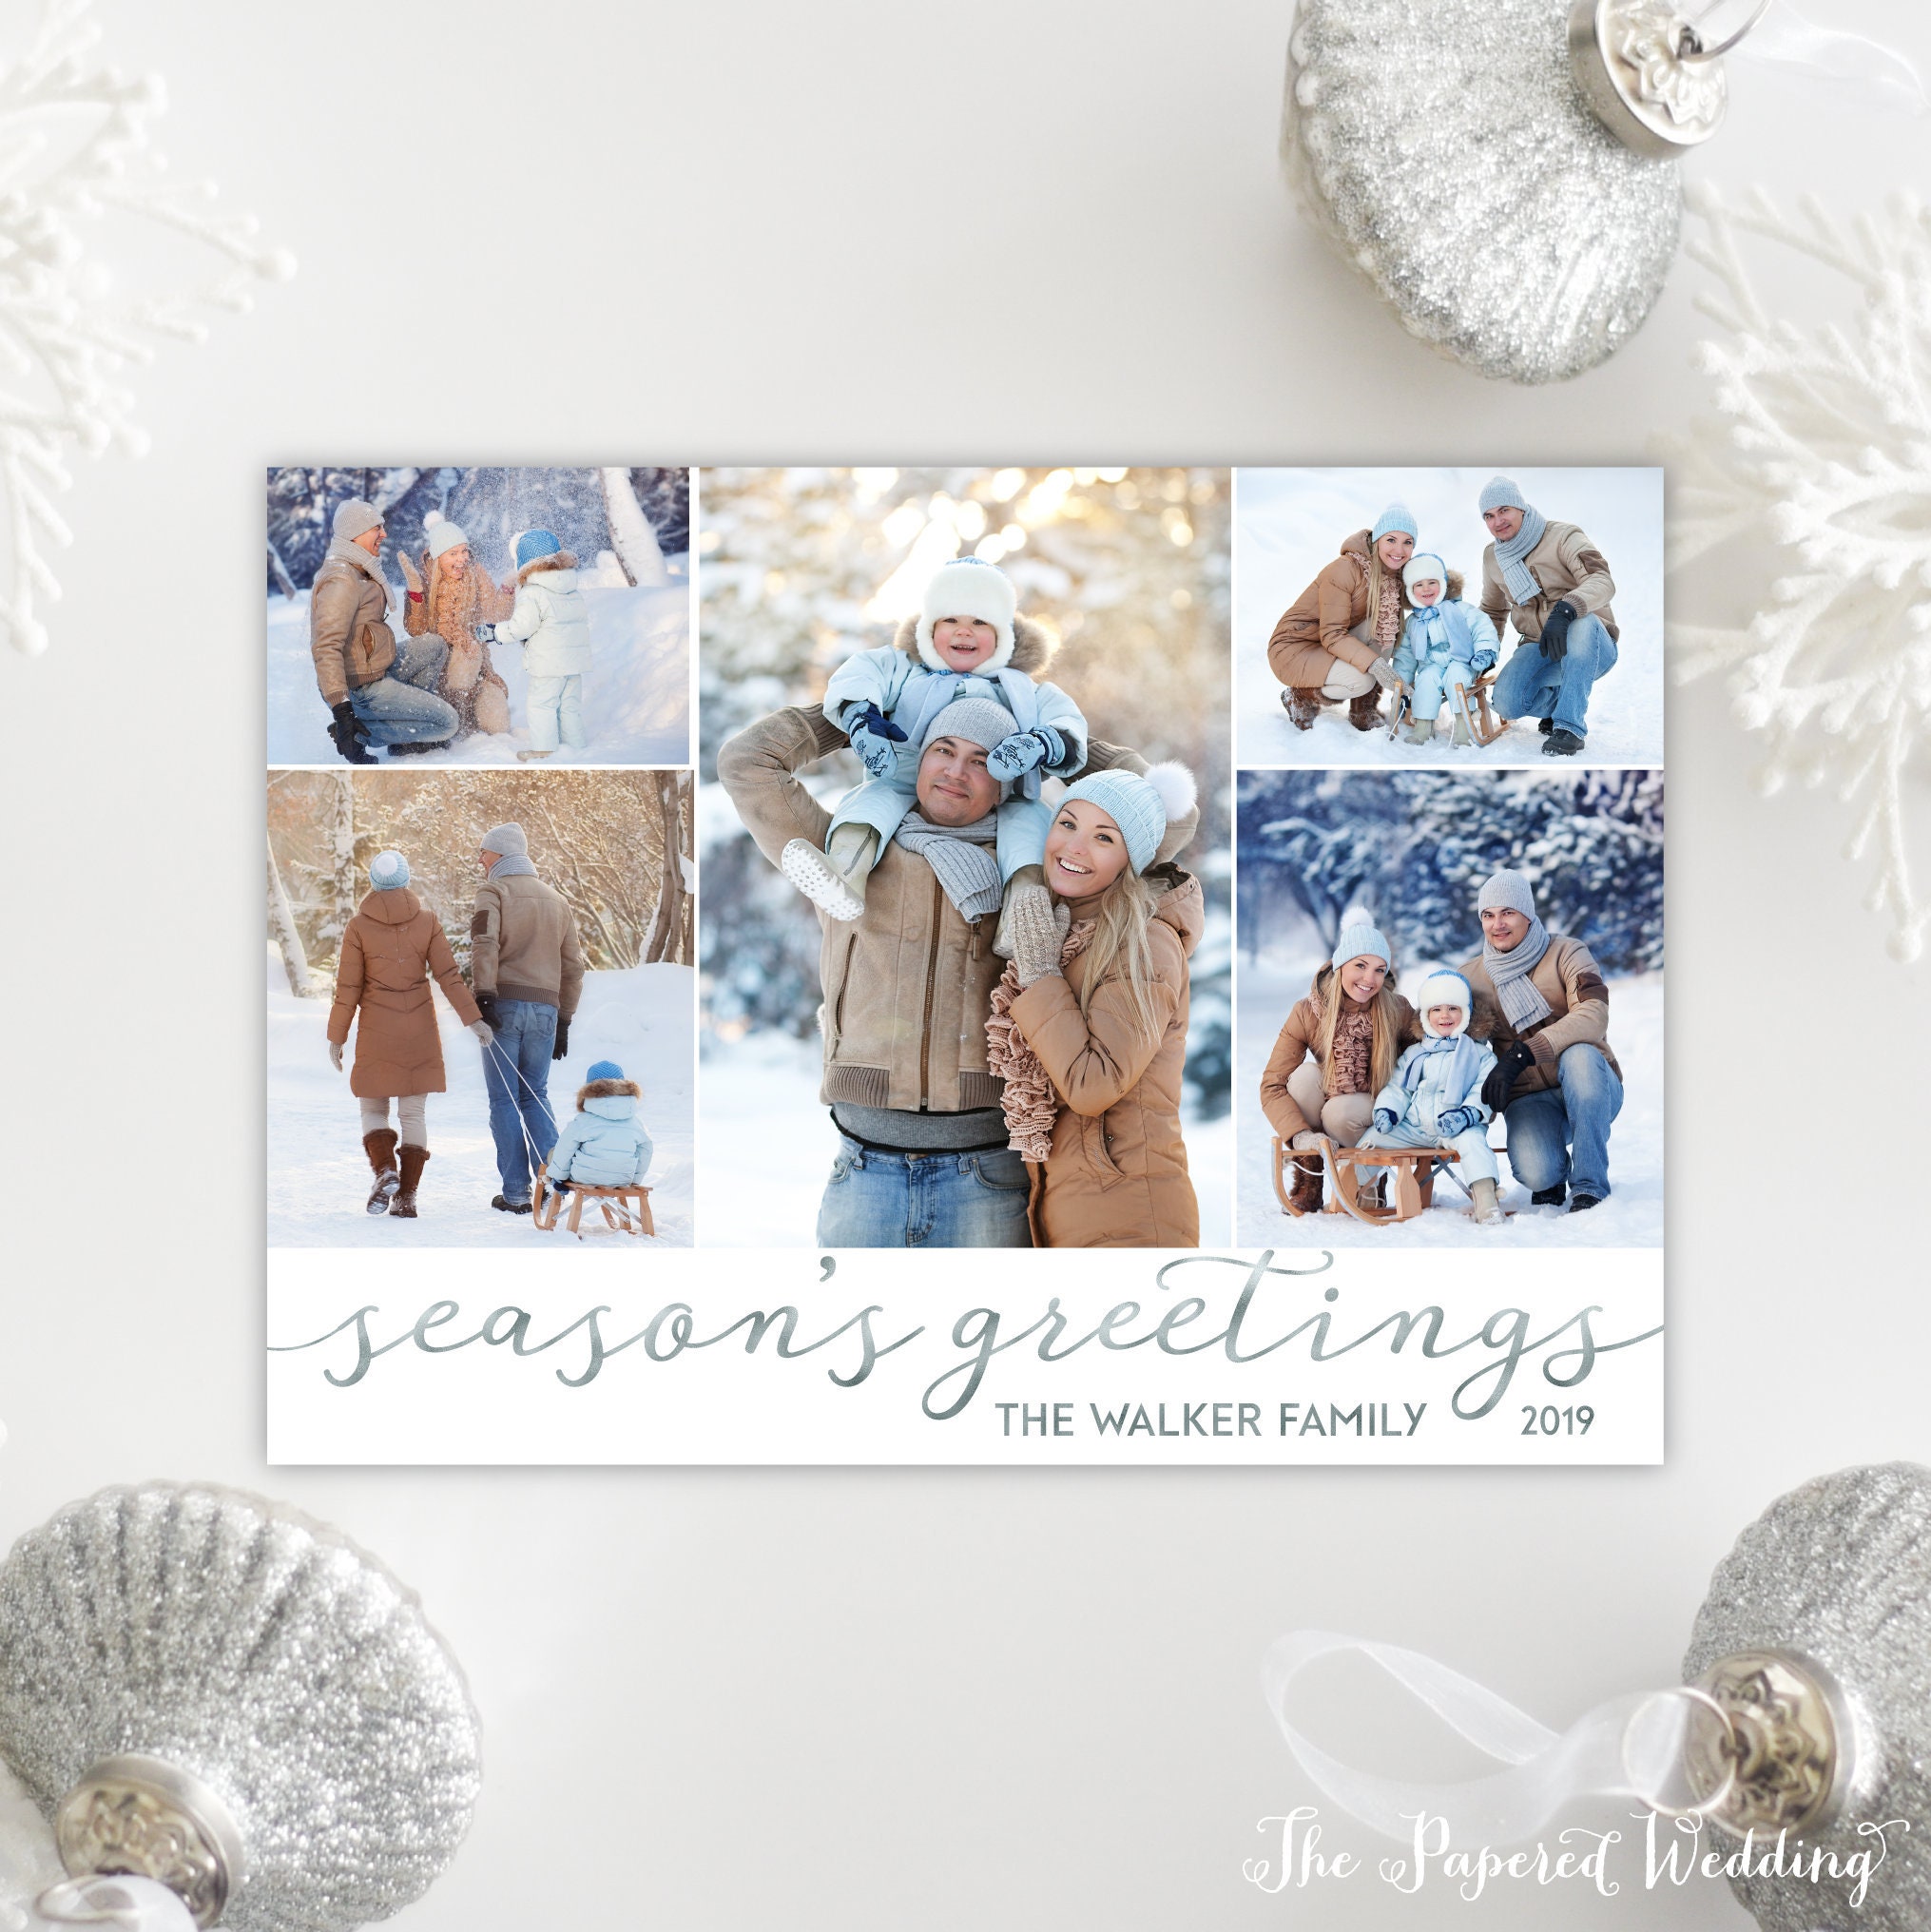 Printable Or Printed Season's Greetings Cards With Five Photos in Faux Silver Foil - Photo Collage, Non-Religious Holiday 076 P4